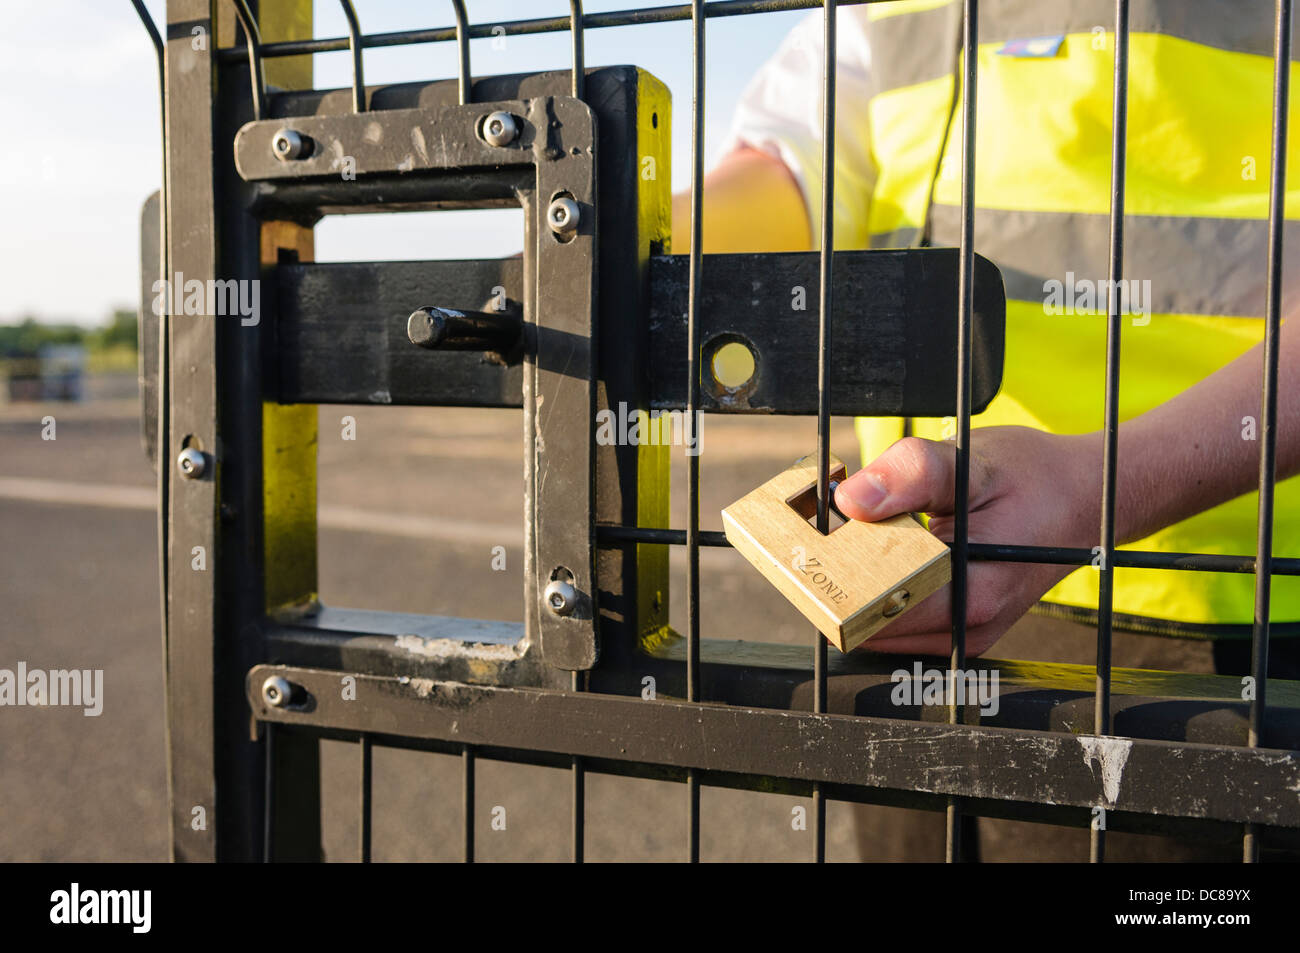 A security guard attaches a lock to a gate after unlocking the bolt and opening the gate Stock Photo